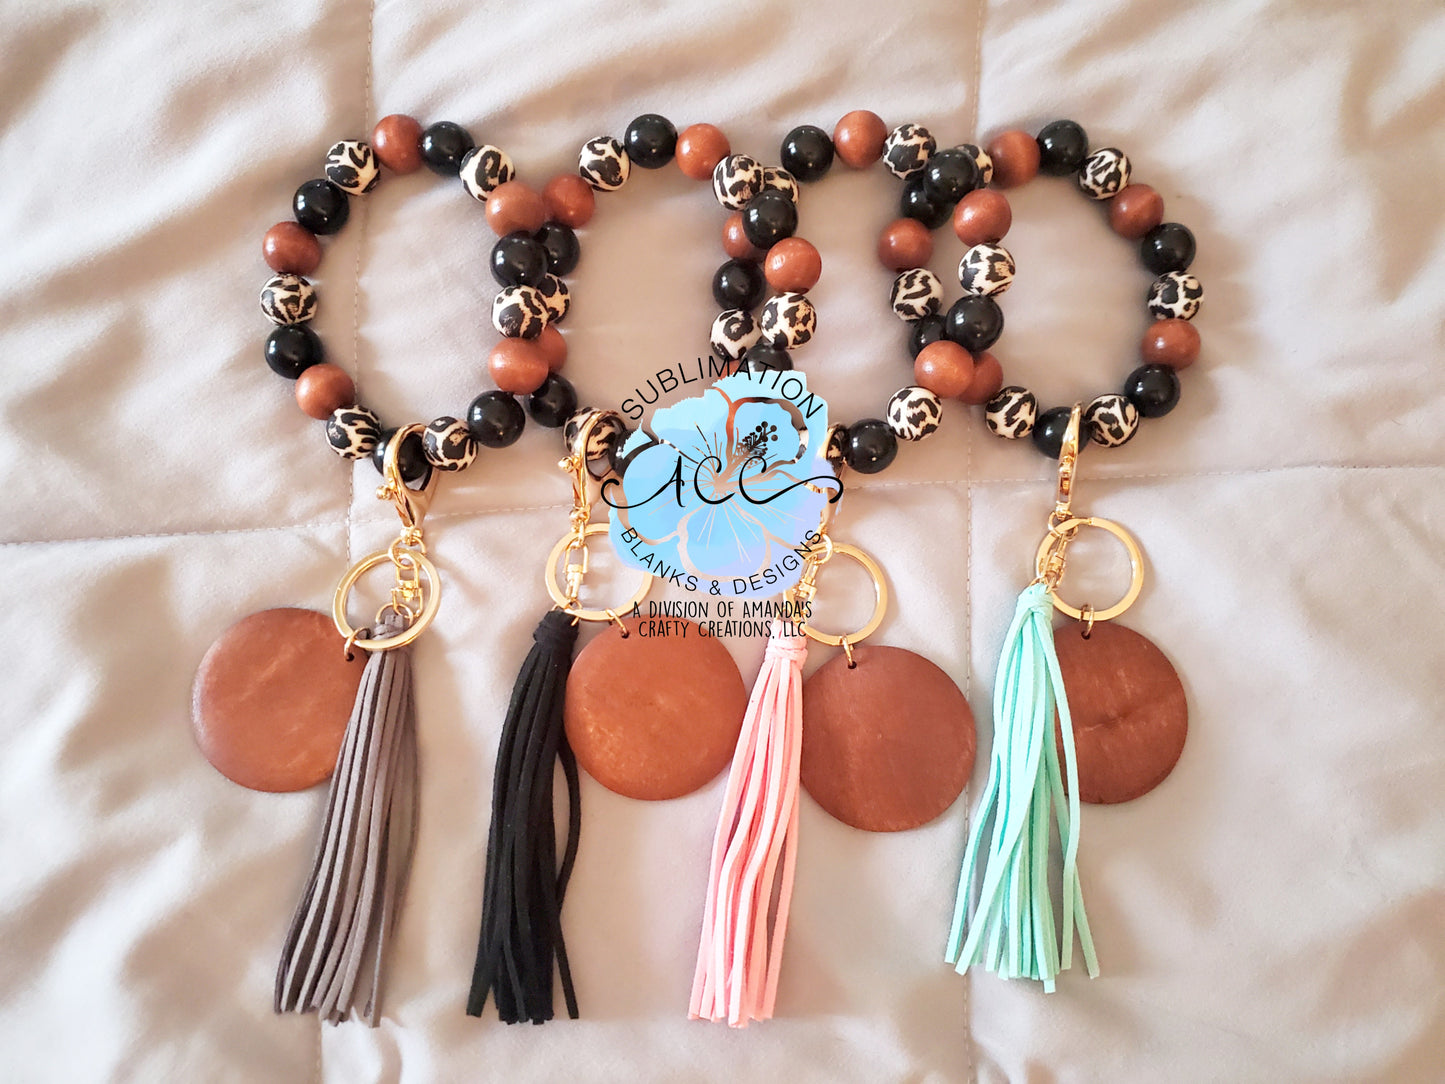 BYO wristlet, build your own keychain bracelet, wood disc with tassel, silicone or wood bead keychain bracelets, laser blanks, laser engraving blank